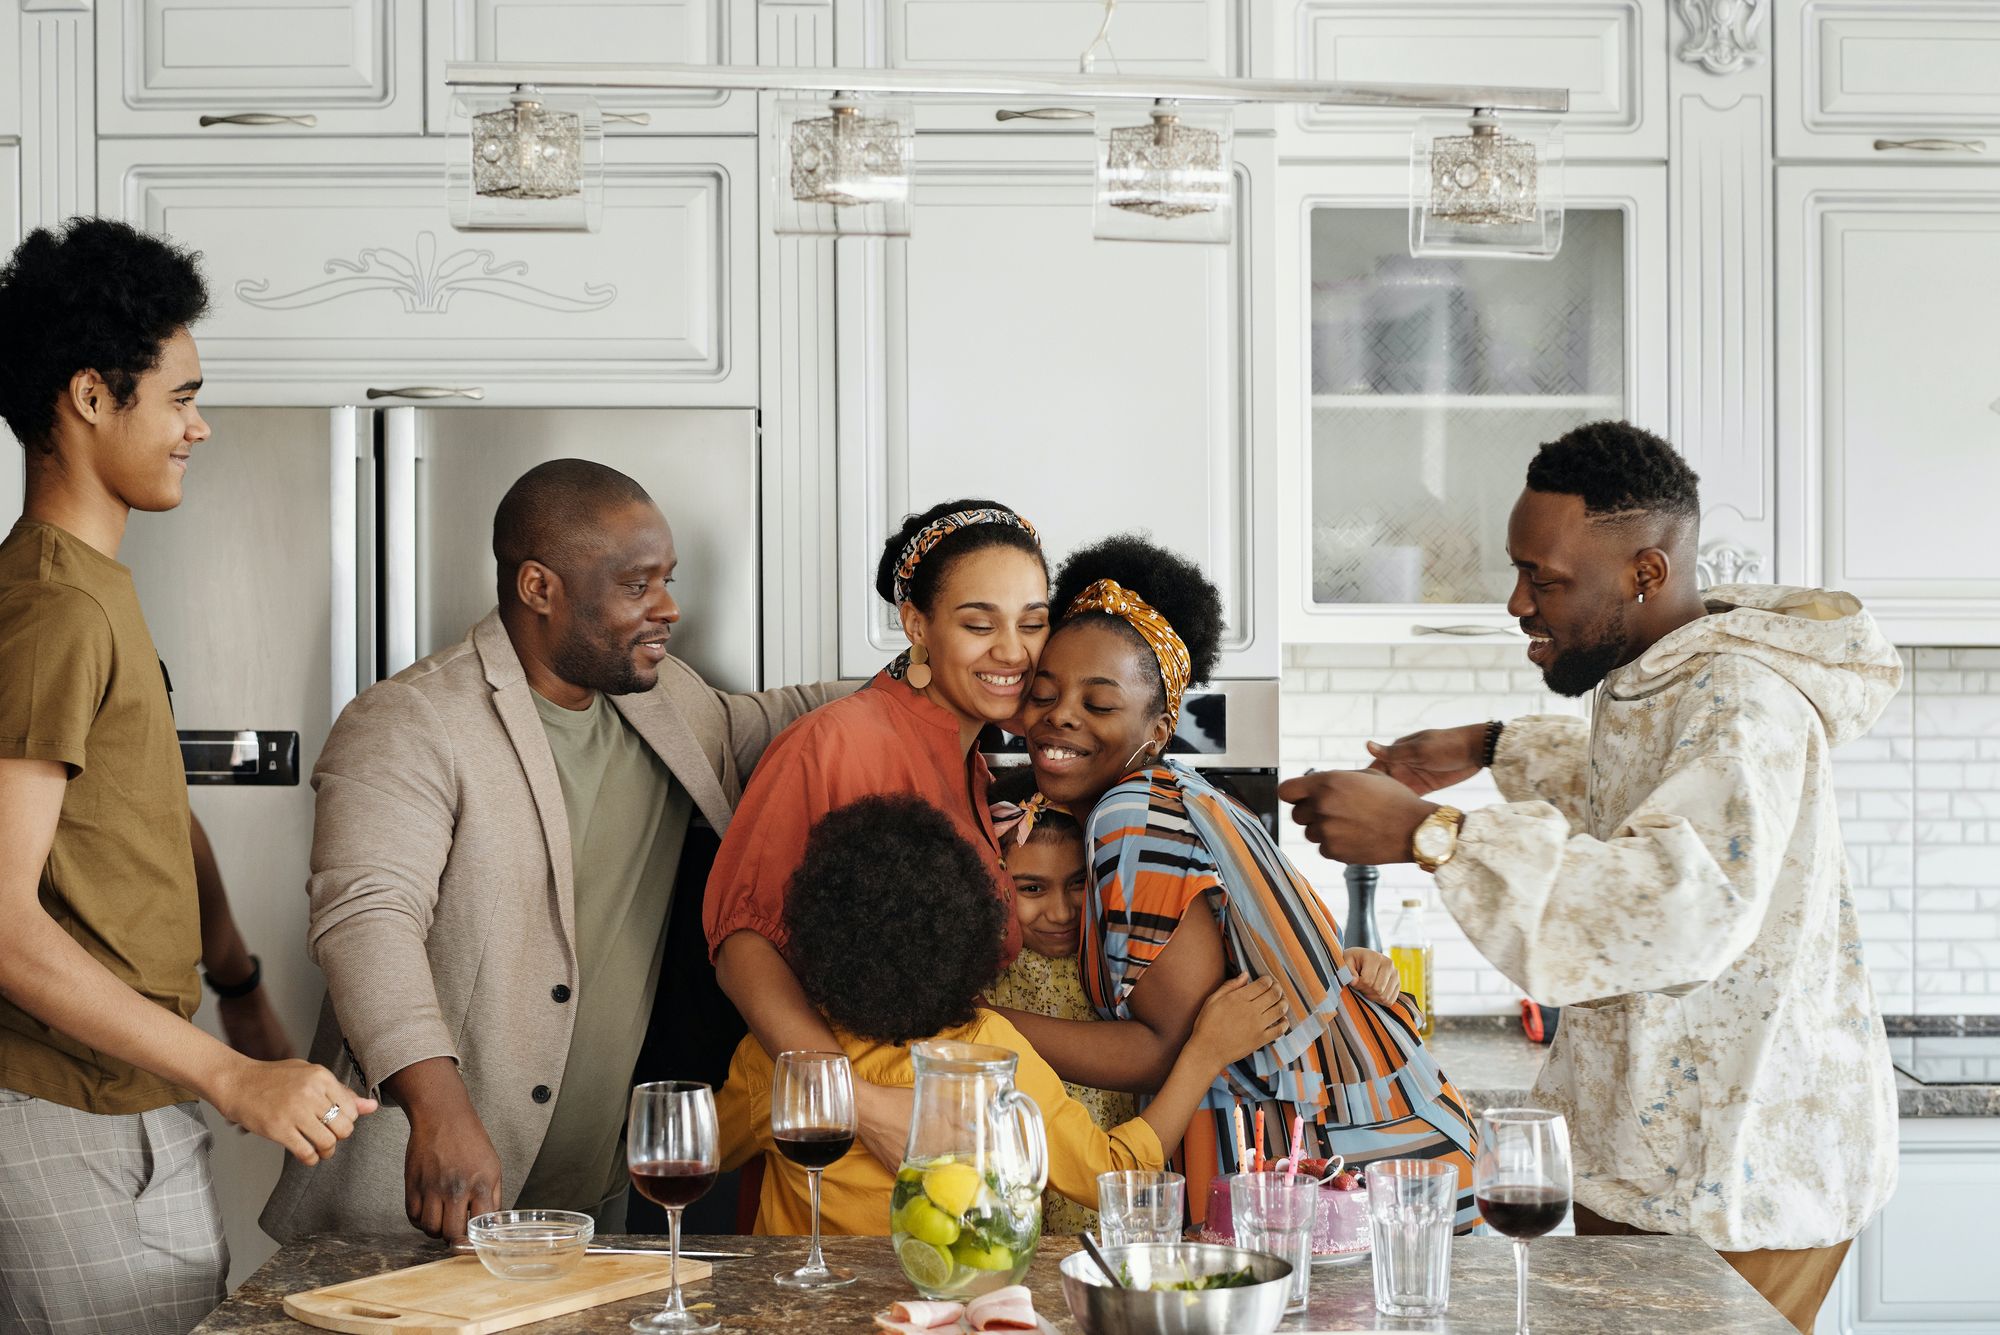 A family in a kitchen, hugging and smiling, gathering for a meal.